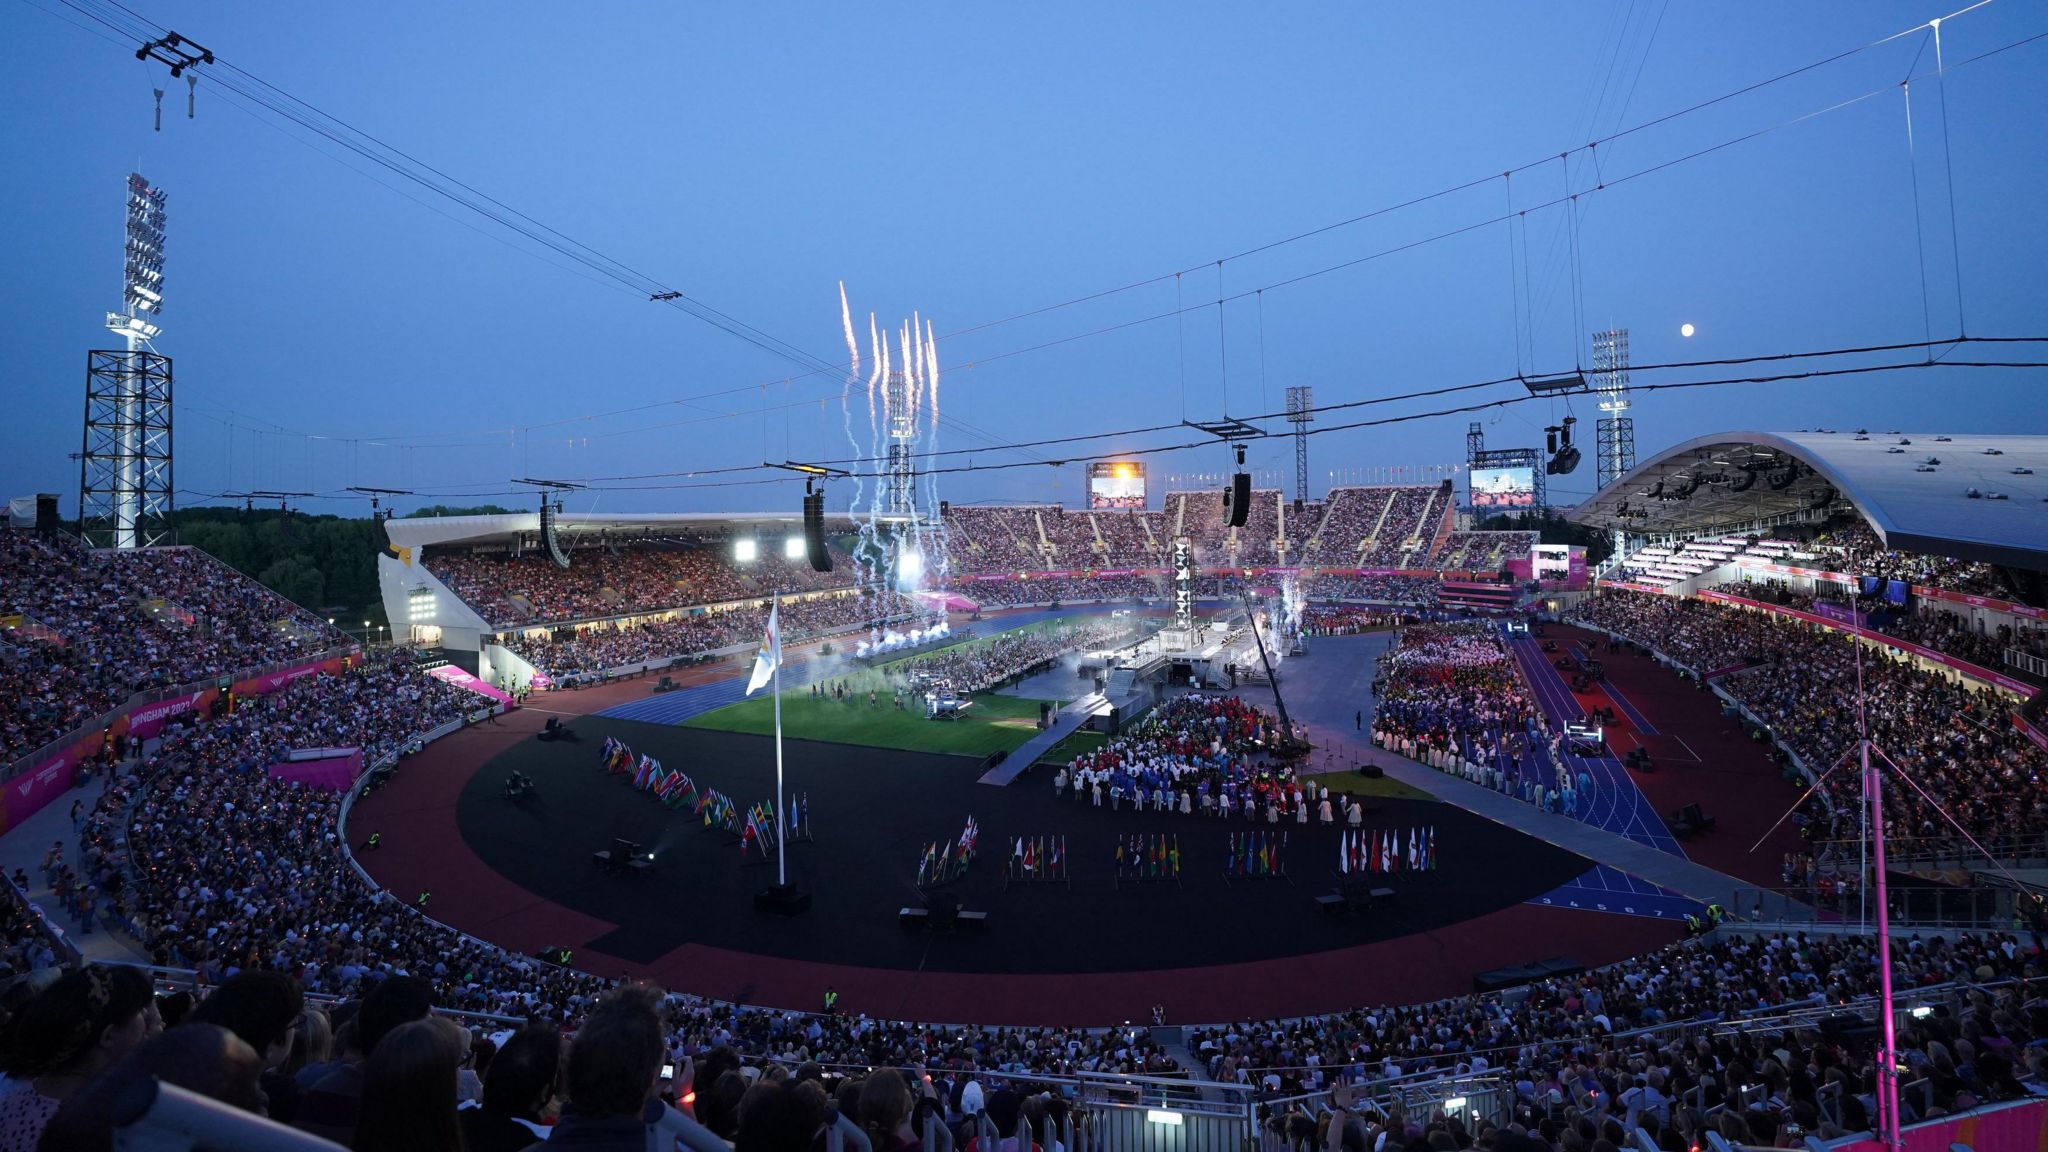 Fireworks over the Alexander Stadium during the Commonwealth Games